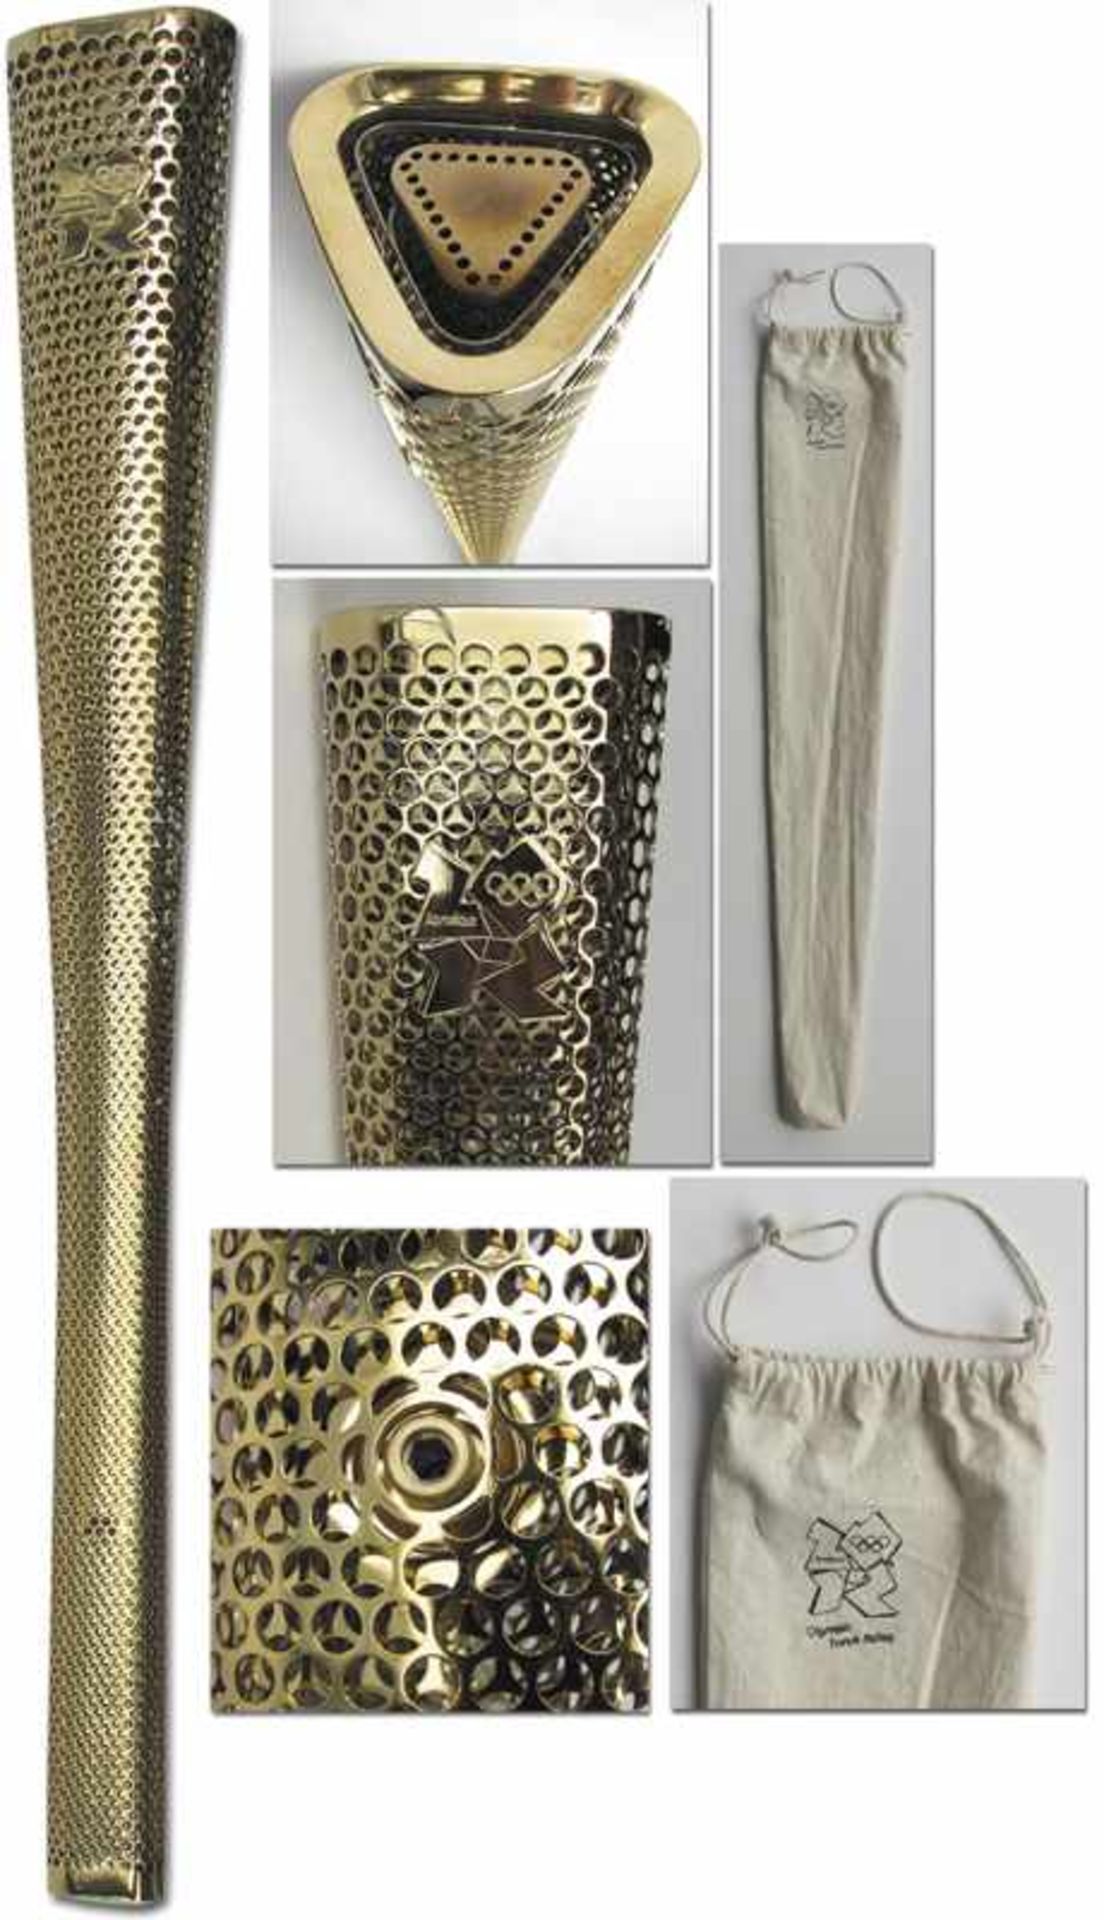 Olympic Games London 2012 Official Torch - Original torch from the Olympic Torch Relay at the